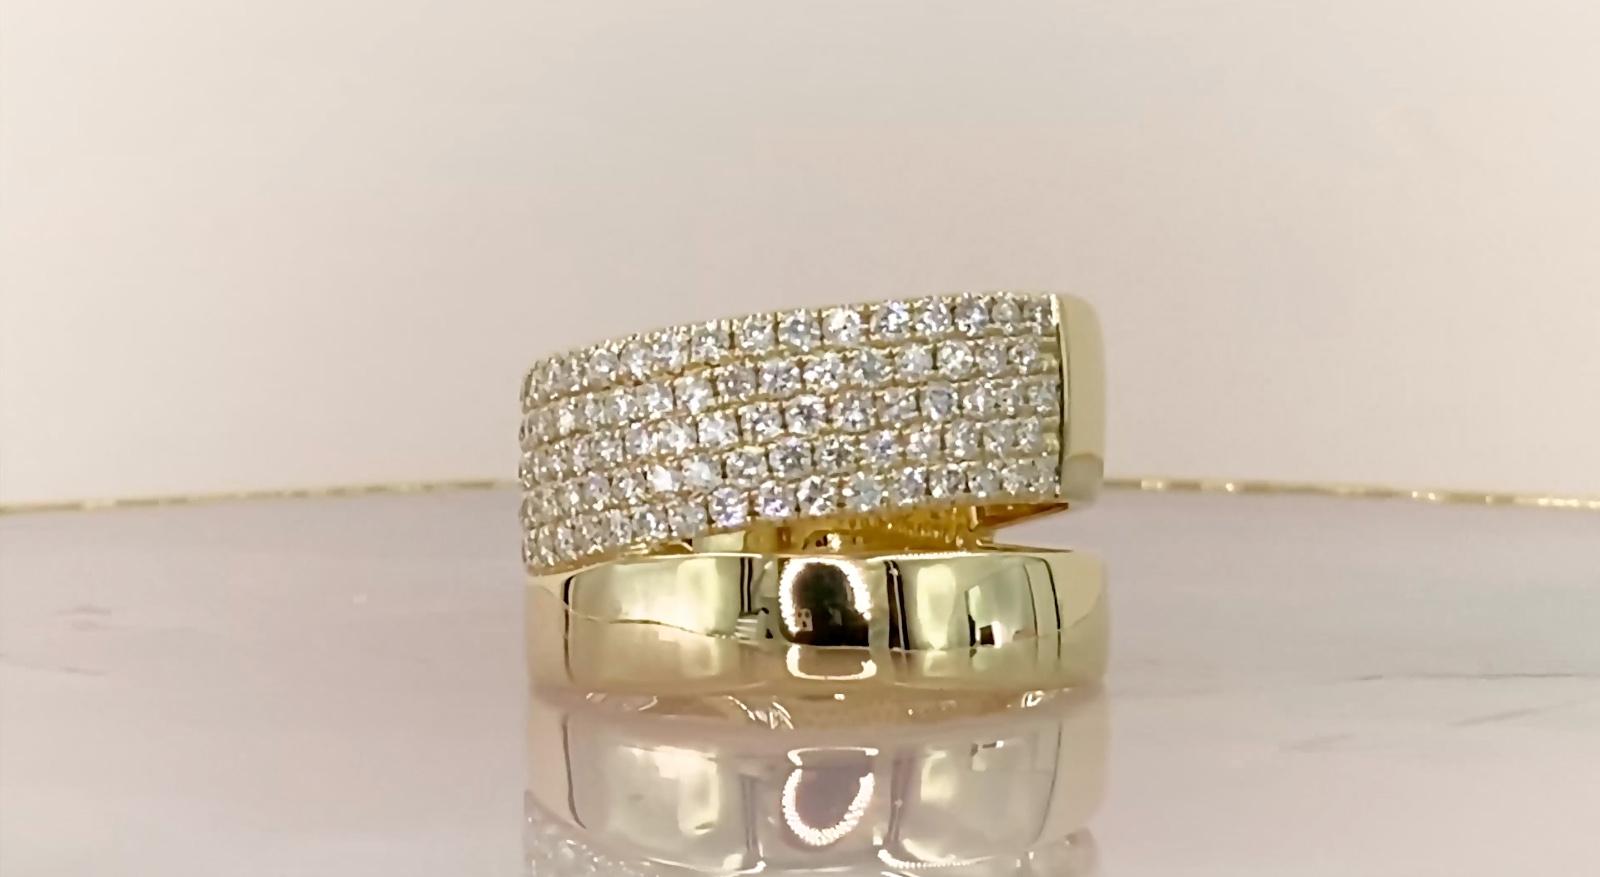 Round cut diamonds (1.03 total carat weight) pave split band ring in 14k yellow gold. The ring is designed and handmade locally in Los Angeles by Sage Designs L.A. using earth-mined and conflict free diamonds. The ring weighs 6.5 grams and all